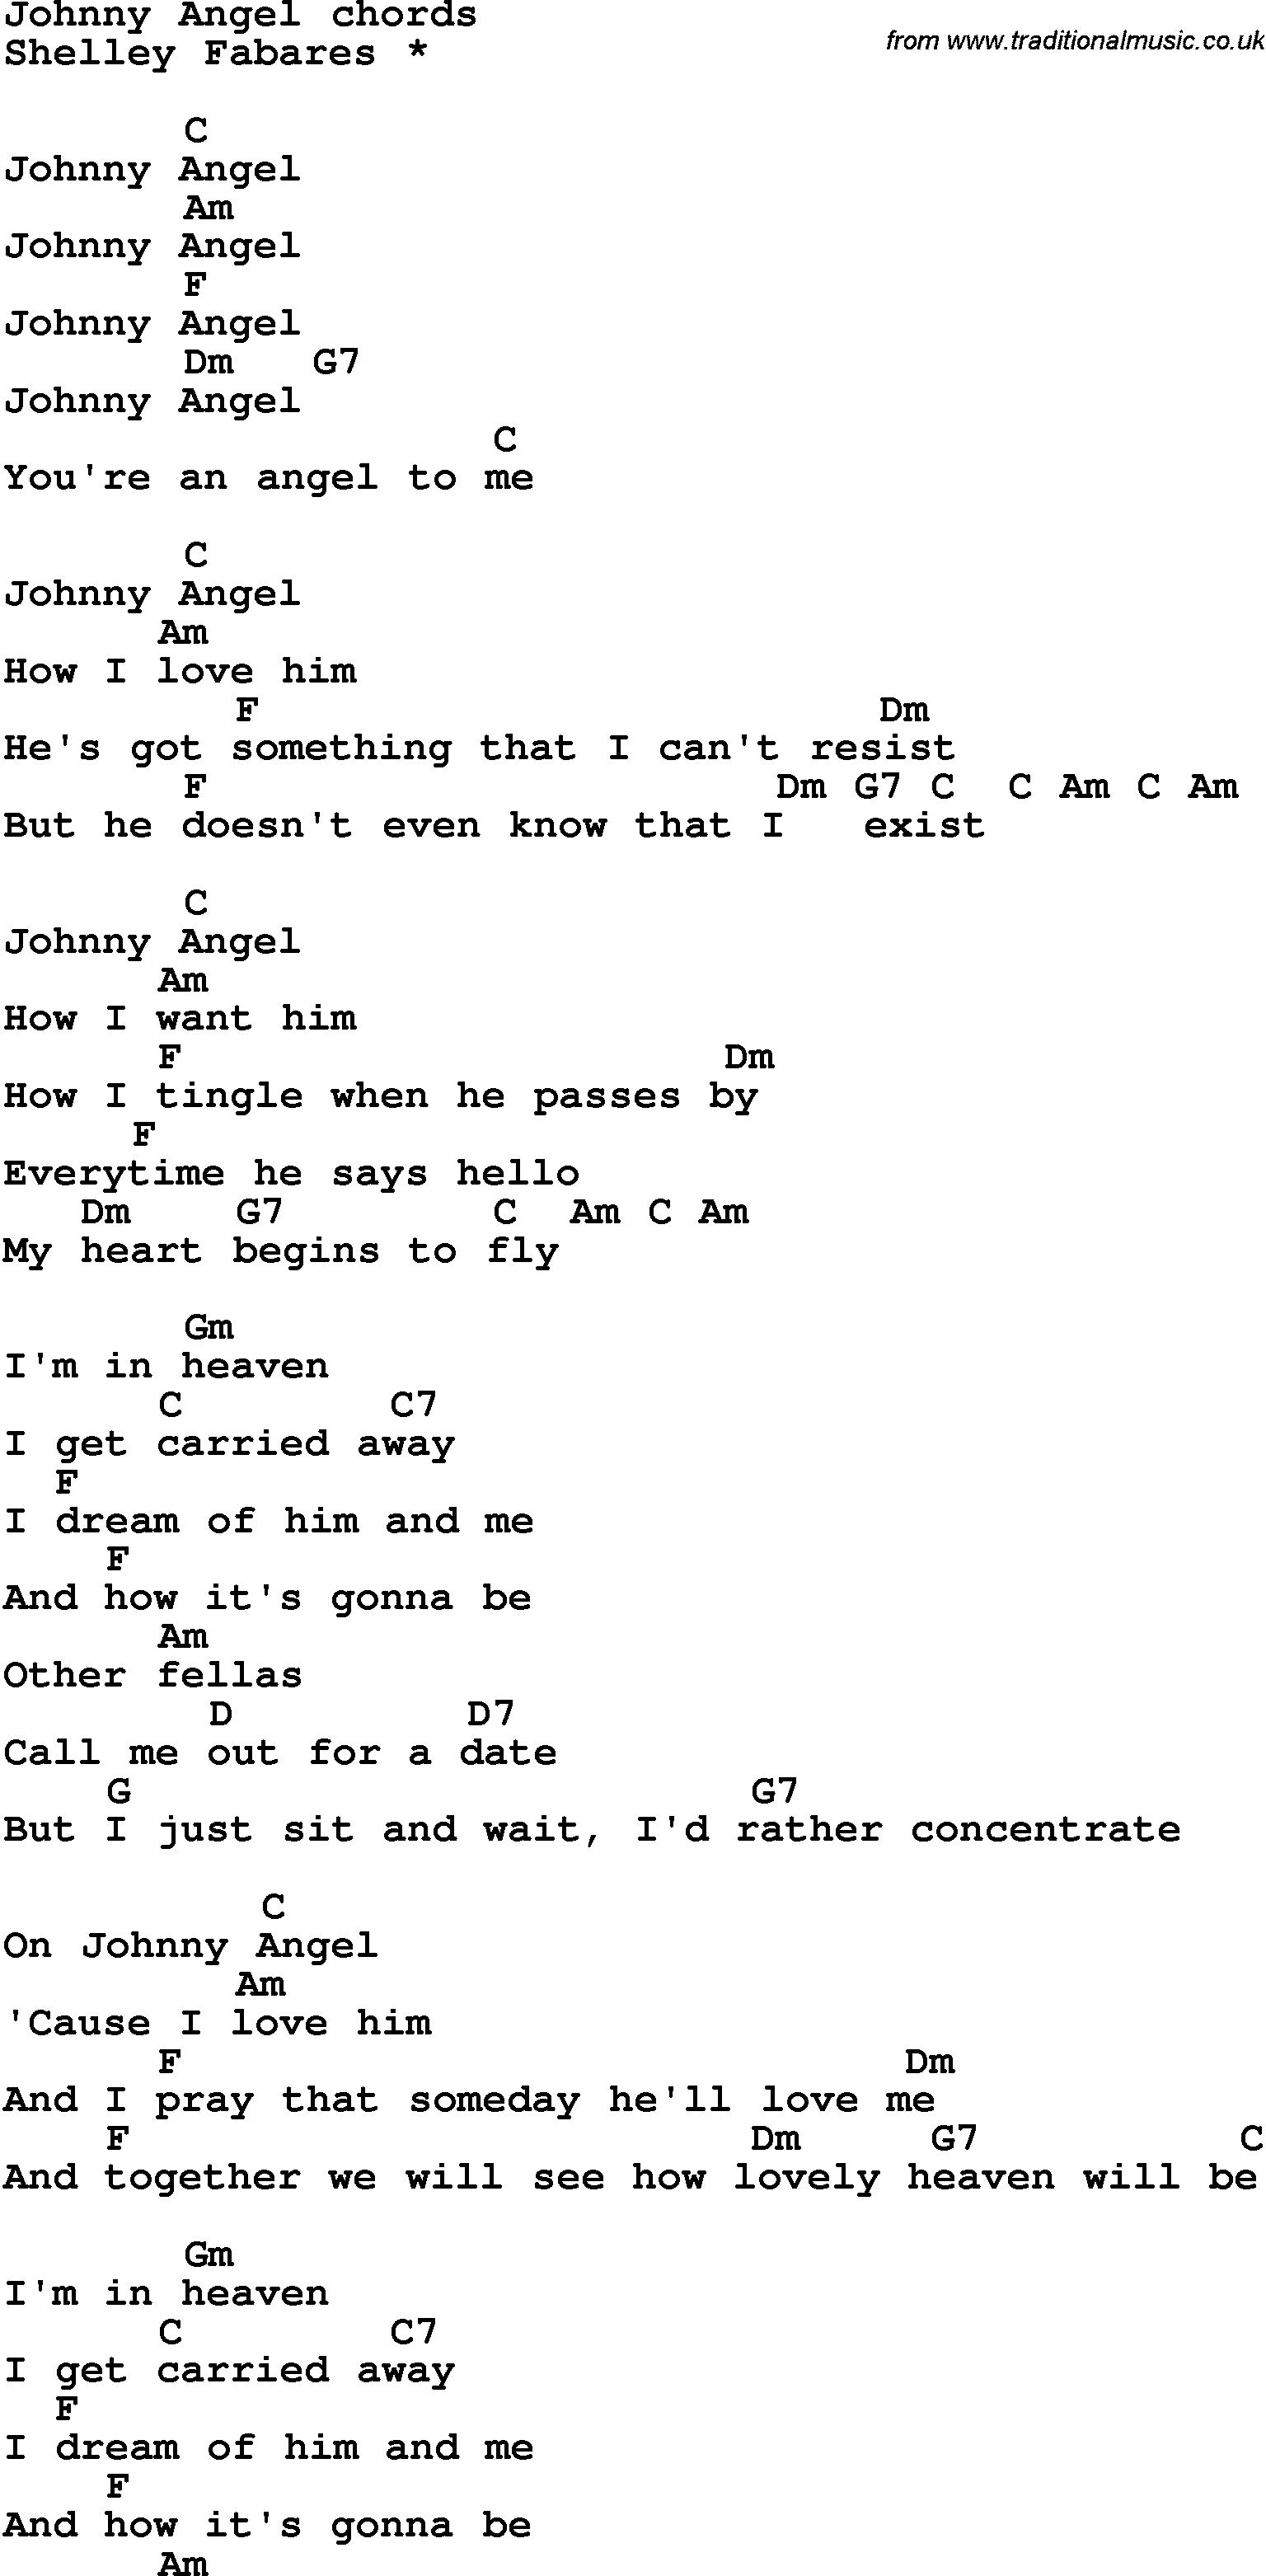 Song Lyrics with guitar chords for Johnny Angel